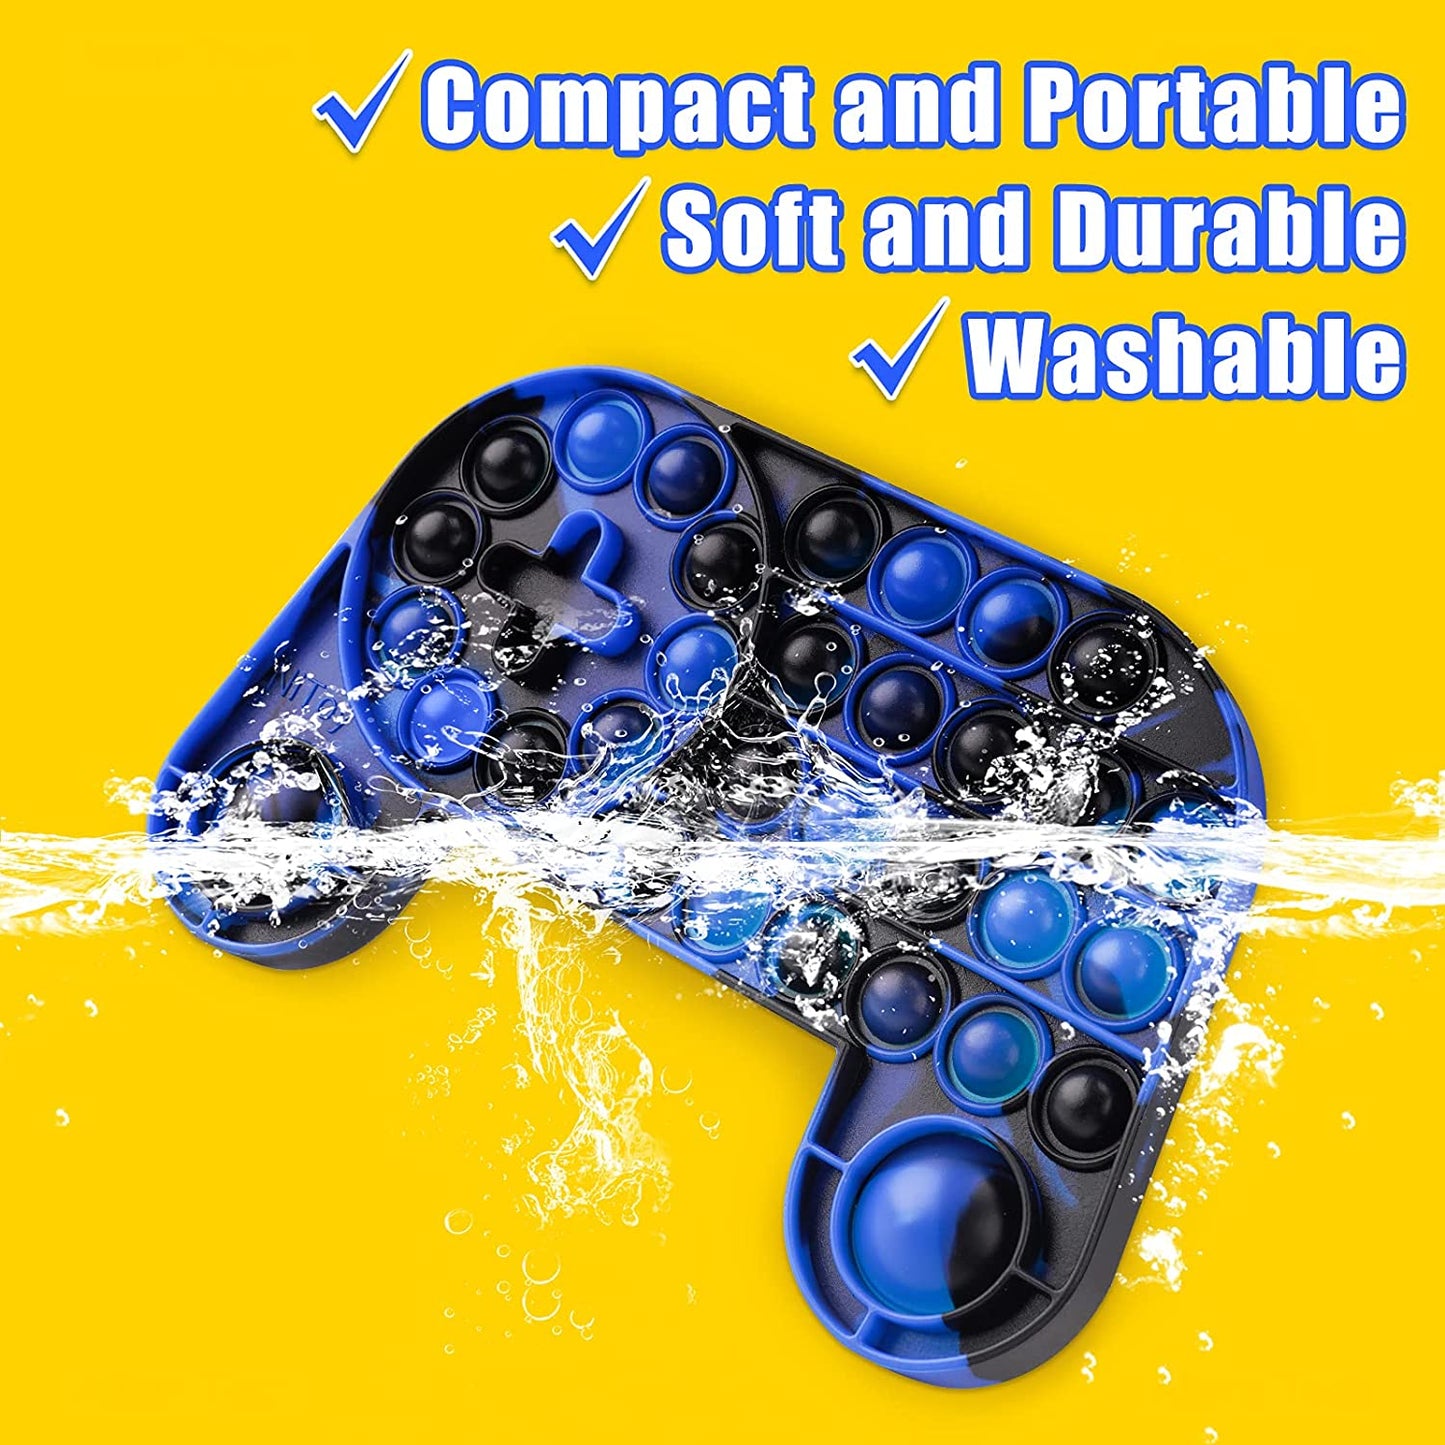 Large Bubble Game Console Silicone Pop Fidget Sensory Toys Keyboard & Controller